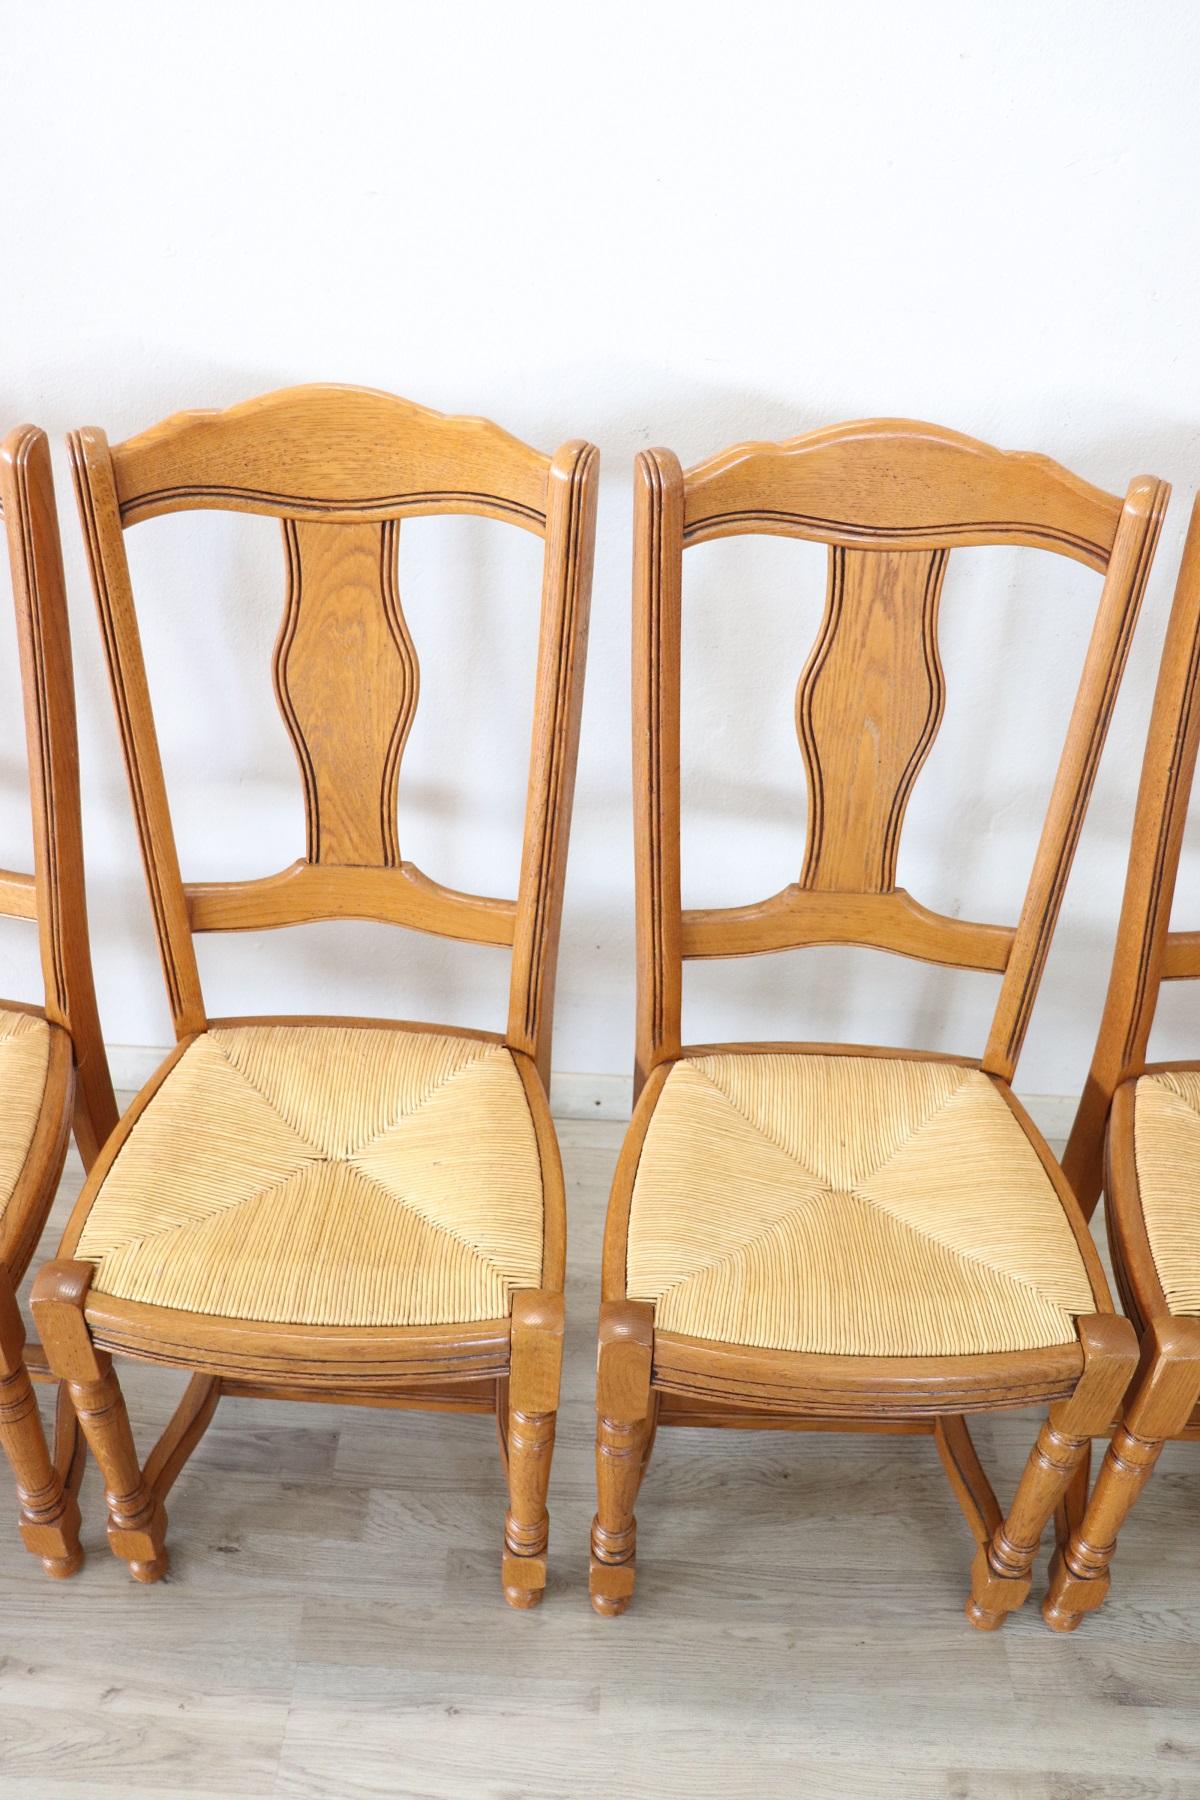 Mid-20th Century 20th Century Italian Solid Oak Wood Set of Six Chairs with Straw Seat